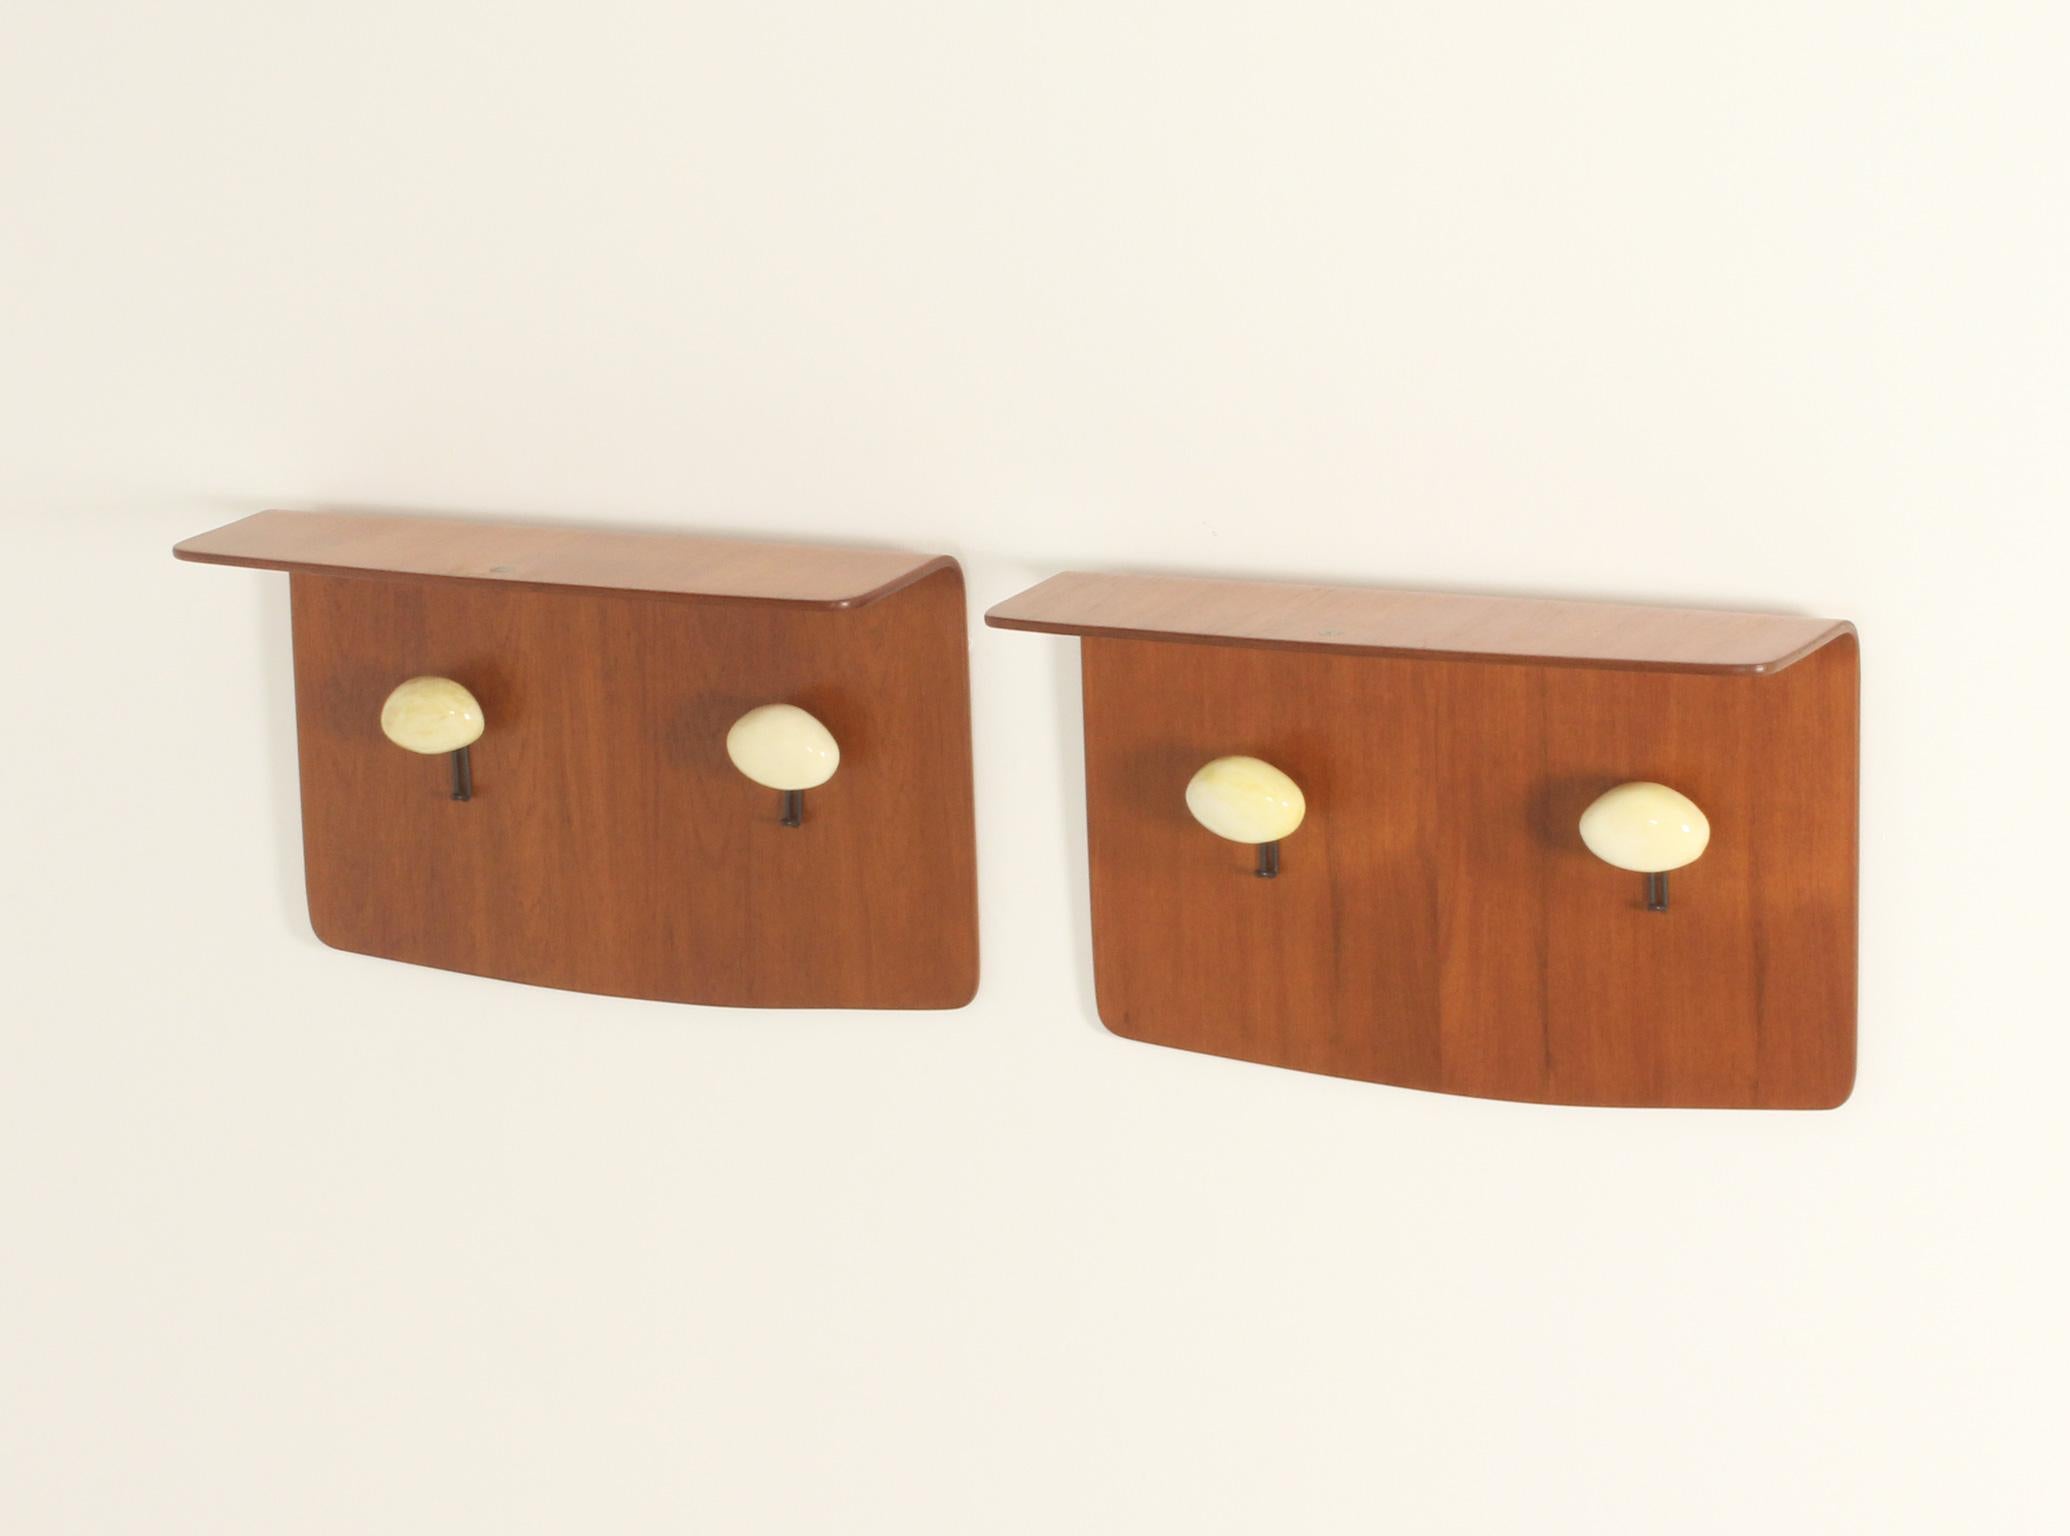 Pair of Coat Racks by Franco Campo and Carlo Graffi for Home, Italy, 1950's  For Sale 6